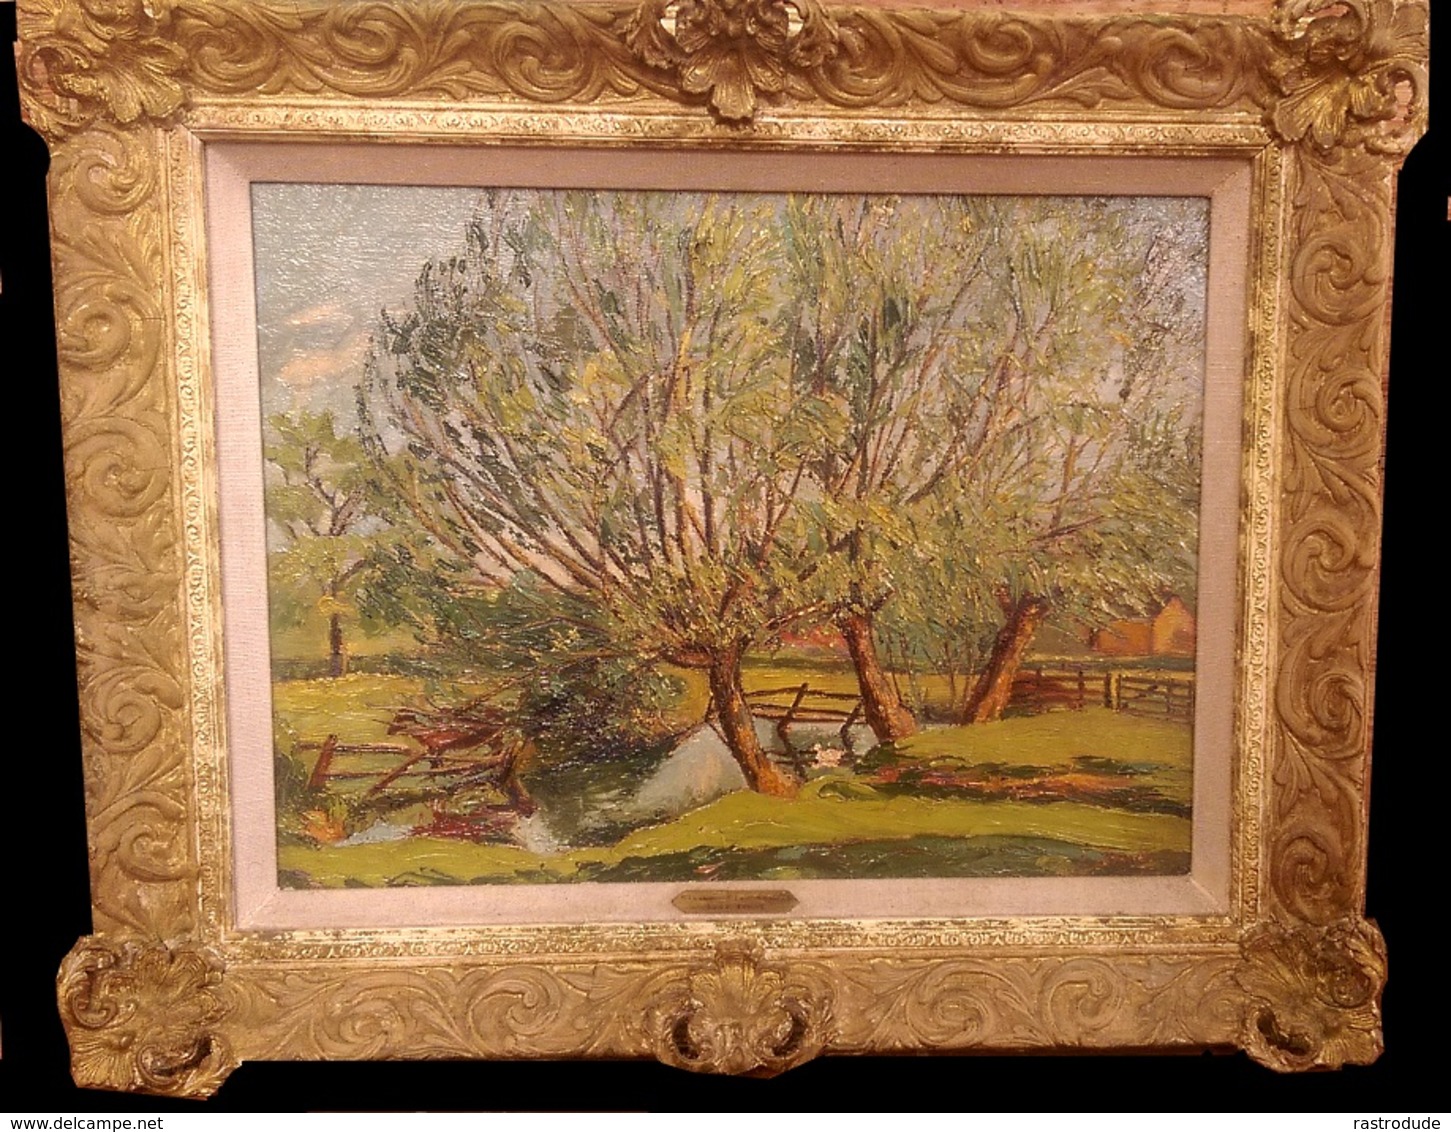 LUCY YOUNG - OIL ON FRENCH PANEL - Ca. 1920 TITLE: POND WITH WILLOW, KNOWLE - ROYAL INSTITUTE OF OIL PAINTERS, EXHIBITOR - Oils